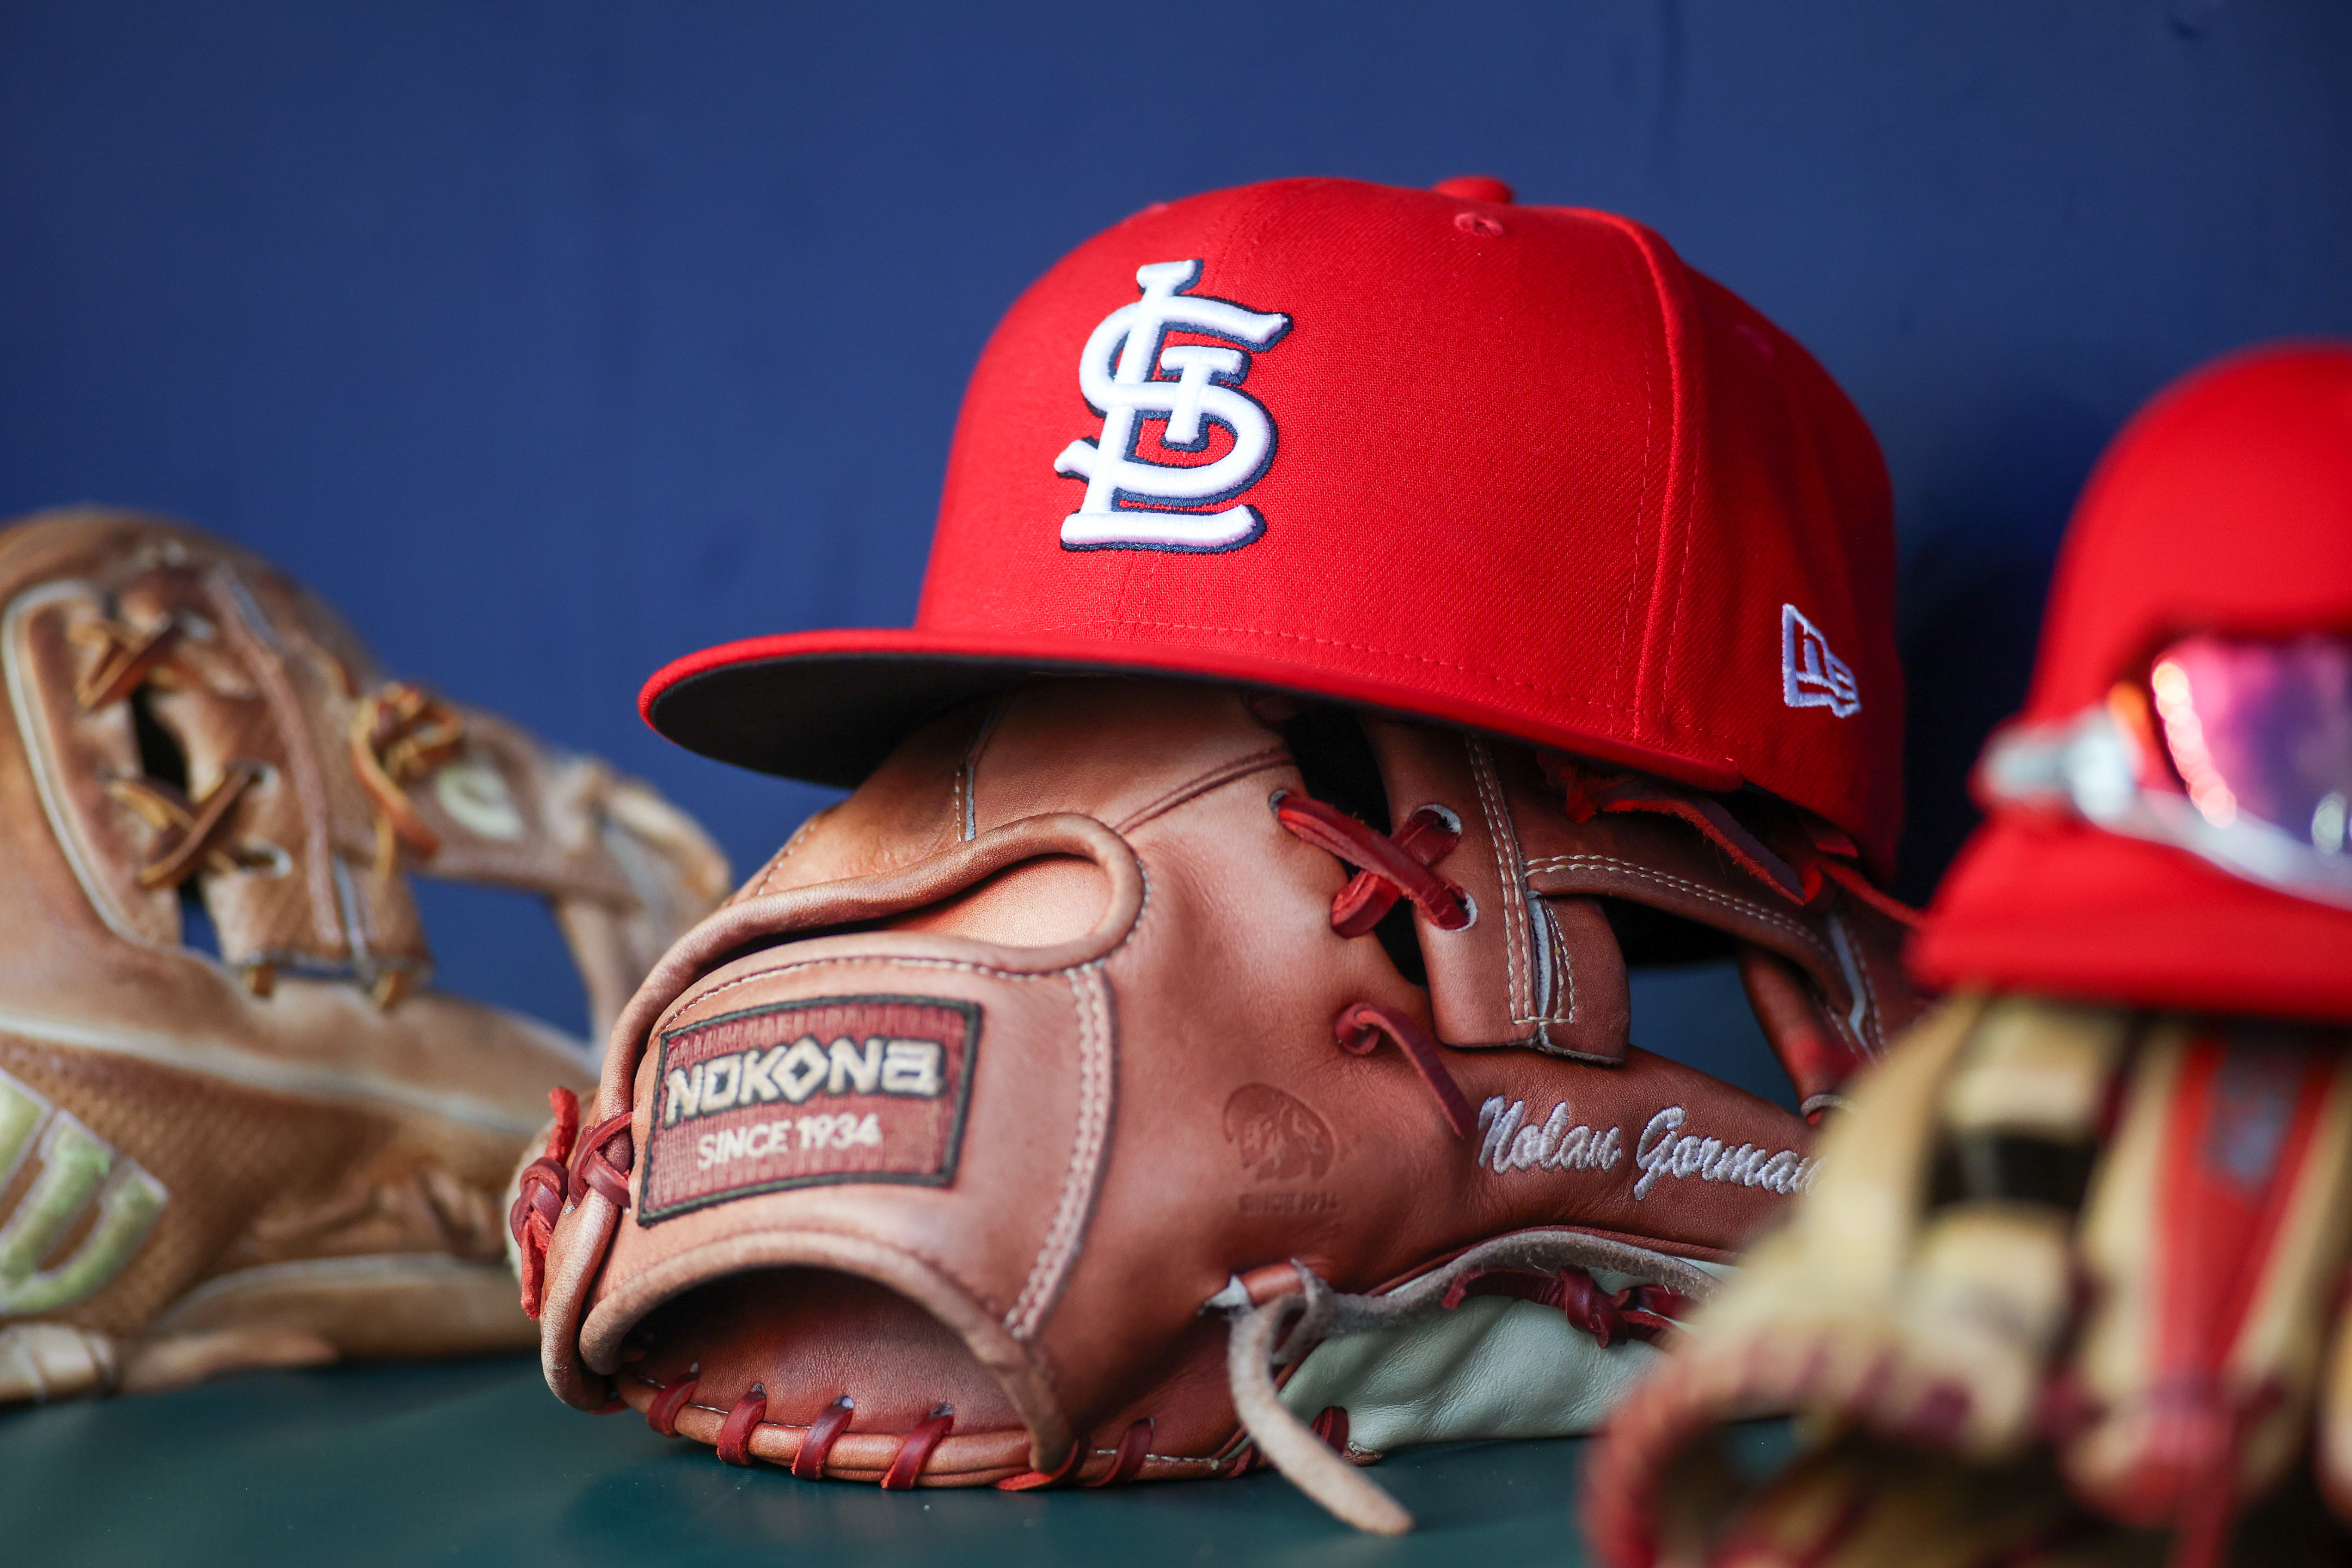 Fans mock the St. Louis Cardinals as they finish as Spring